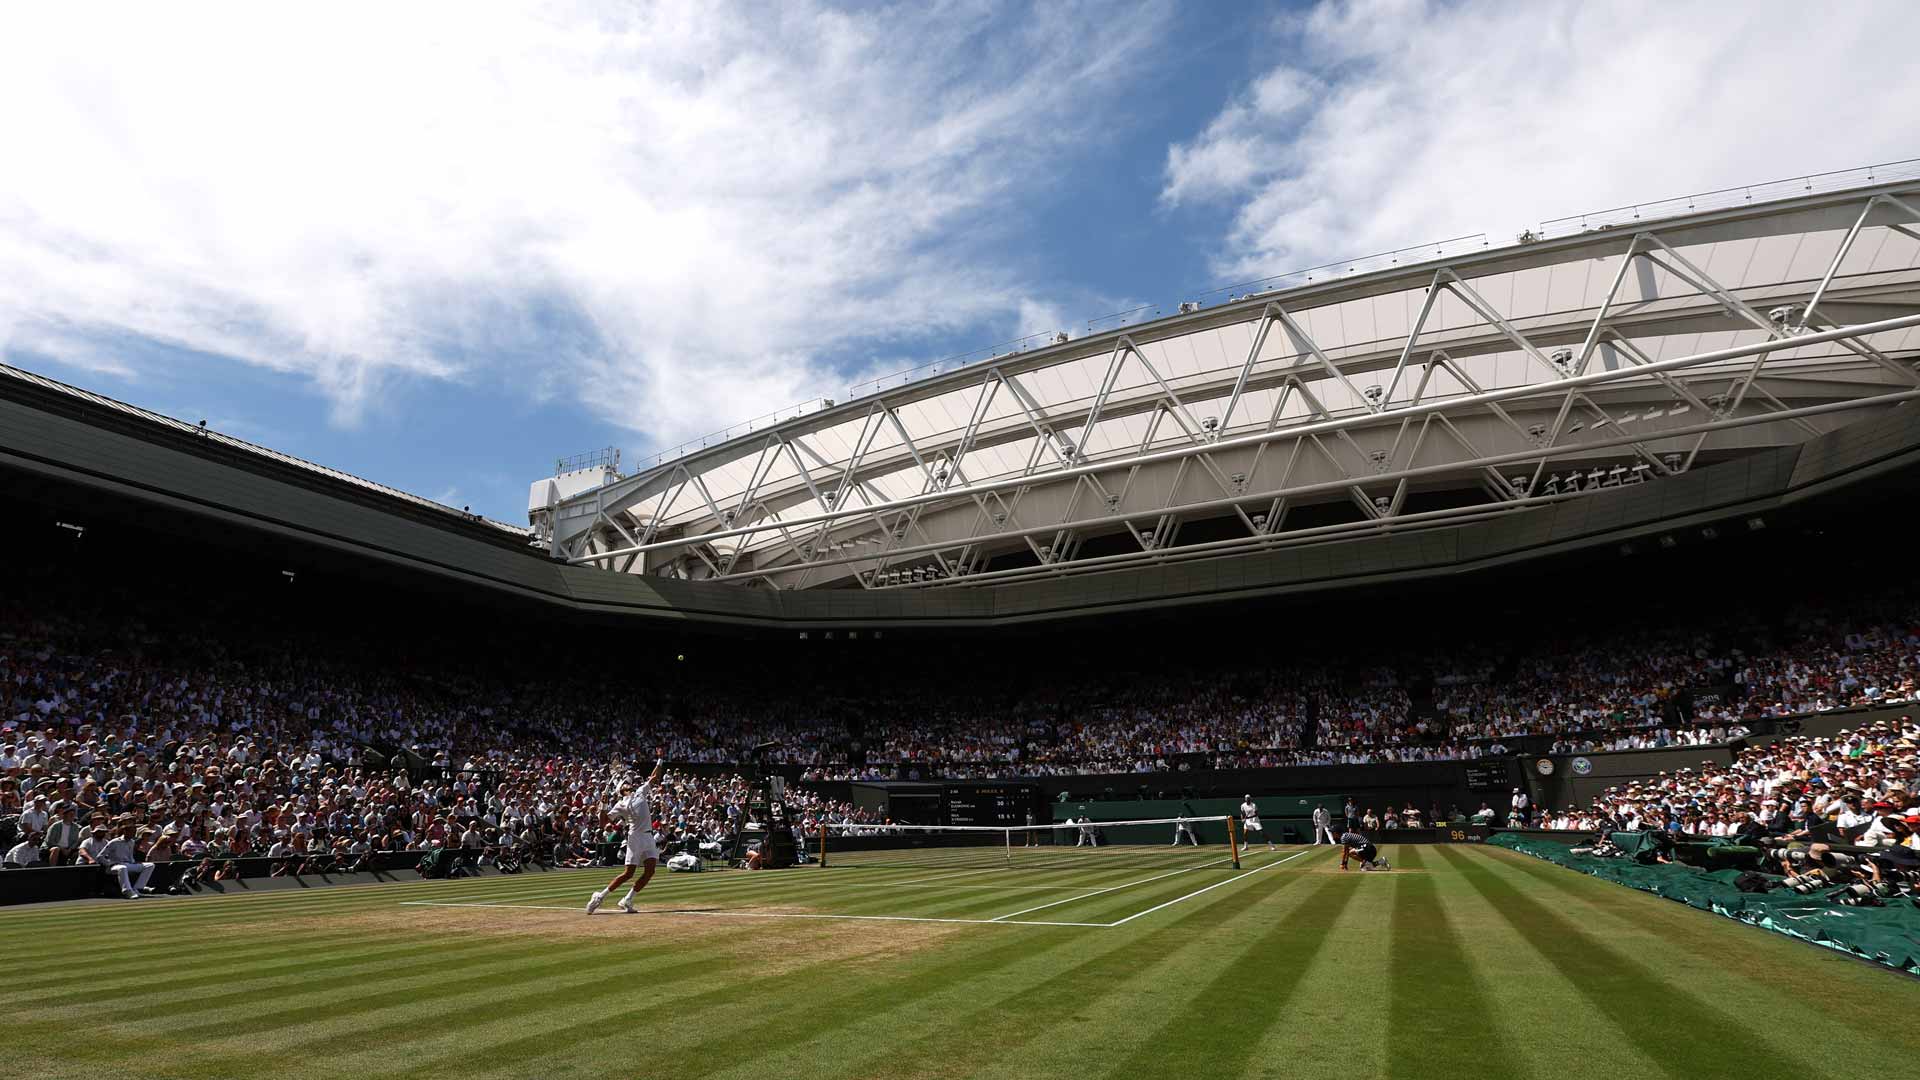 Wimbledon 2023: Schedule, broadcast info, players to watch